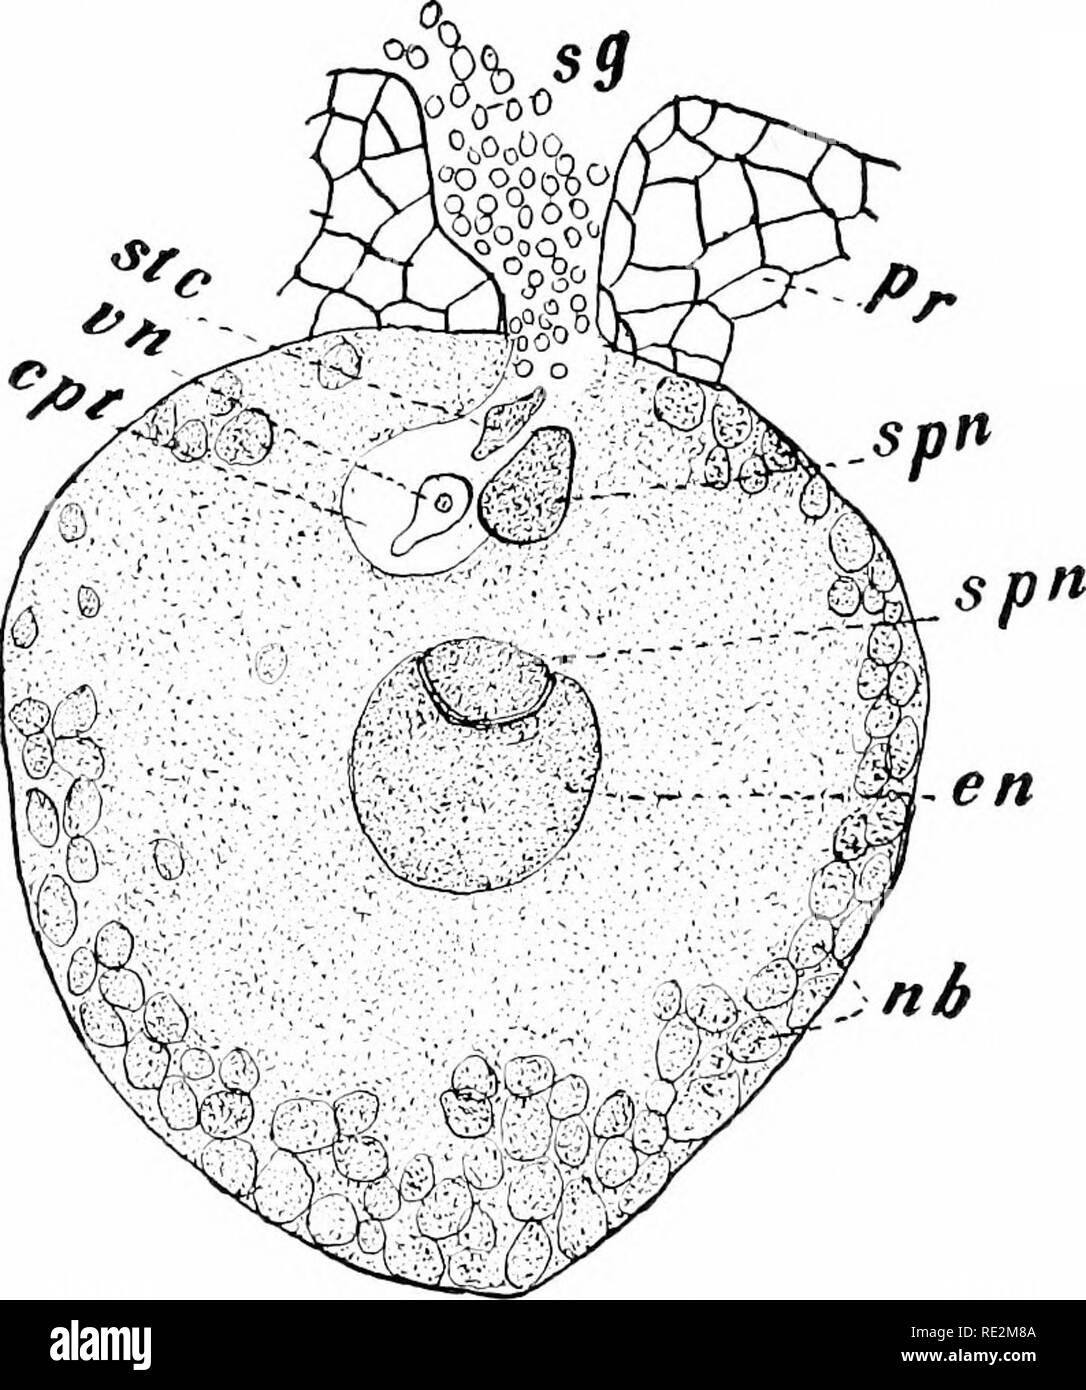 . Elementary botany. Botany. 3o8 MORPHOLOGY. ize the embryo which pushes its way into the endosperm from which it derives its food (tig. 362). 626. Homology of the parts of the female cone.^—Opinions are divided as to the homology of the parts of the female cone of the pine. Some consider the entire cone to be homologous with a flower of the angiosperms. The. Fig. ,^0i. Archegonium nf white riine at stage ijf fertilization, en, egg nucleus; spn. sperm nucleus in ctmjugatiMn with it; n6, nutritive bodies in cytoplasm of large egg; cpt, cavity of pollen tube; vn, vegetative nucleus or tube nucle Stock Photo